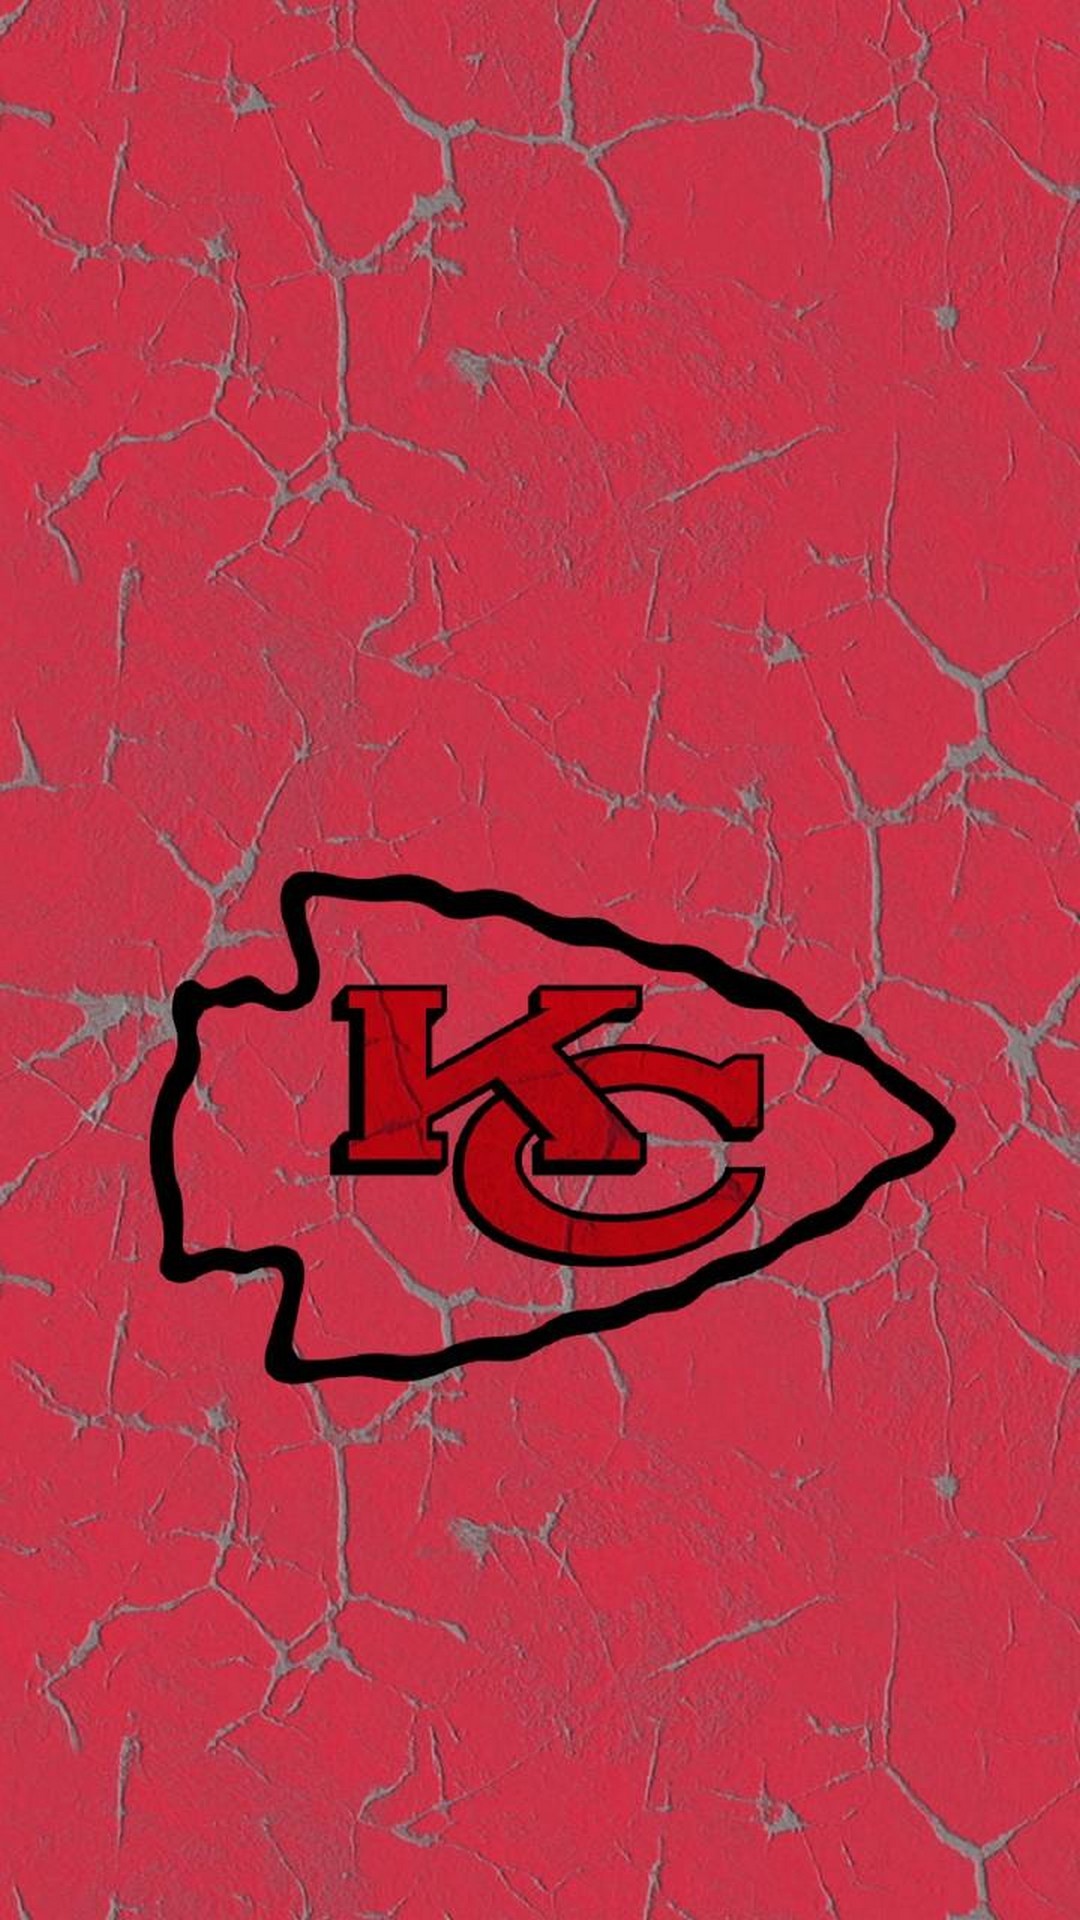 Kansas City Chiefs NFL iPhone Home Screen Wallpaper with high-resolution 1080x1920 pixel. Download and set as wallpaper for Desktop Computer, Apple iPhone X, XS Max, XR, 8, 7, 6, SE, iPad, Android